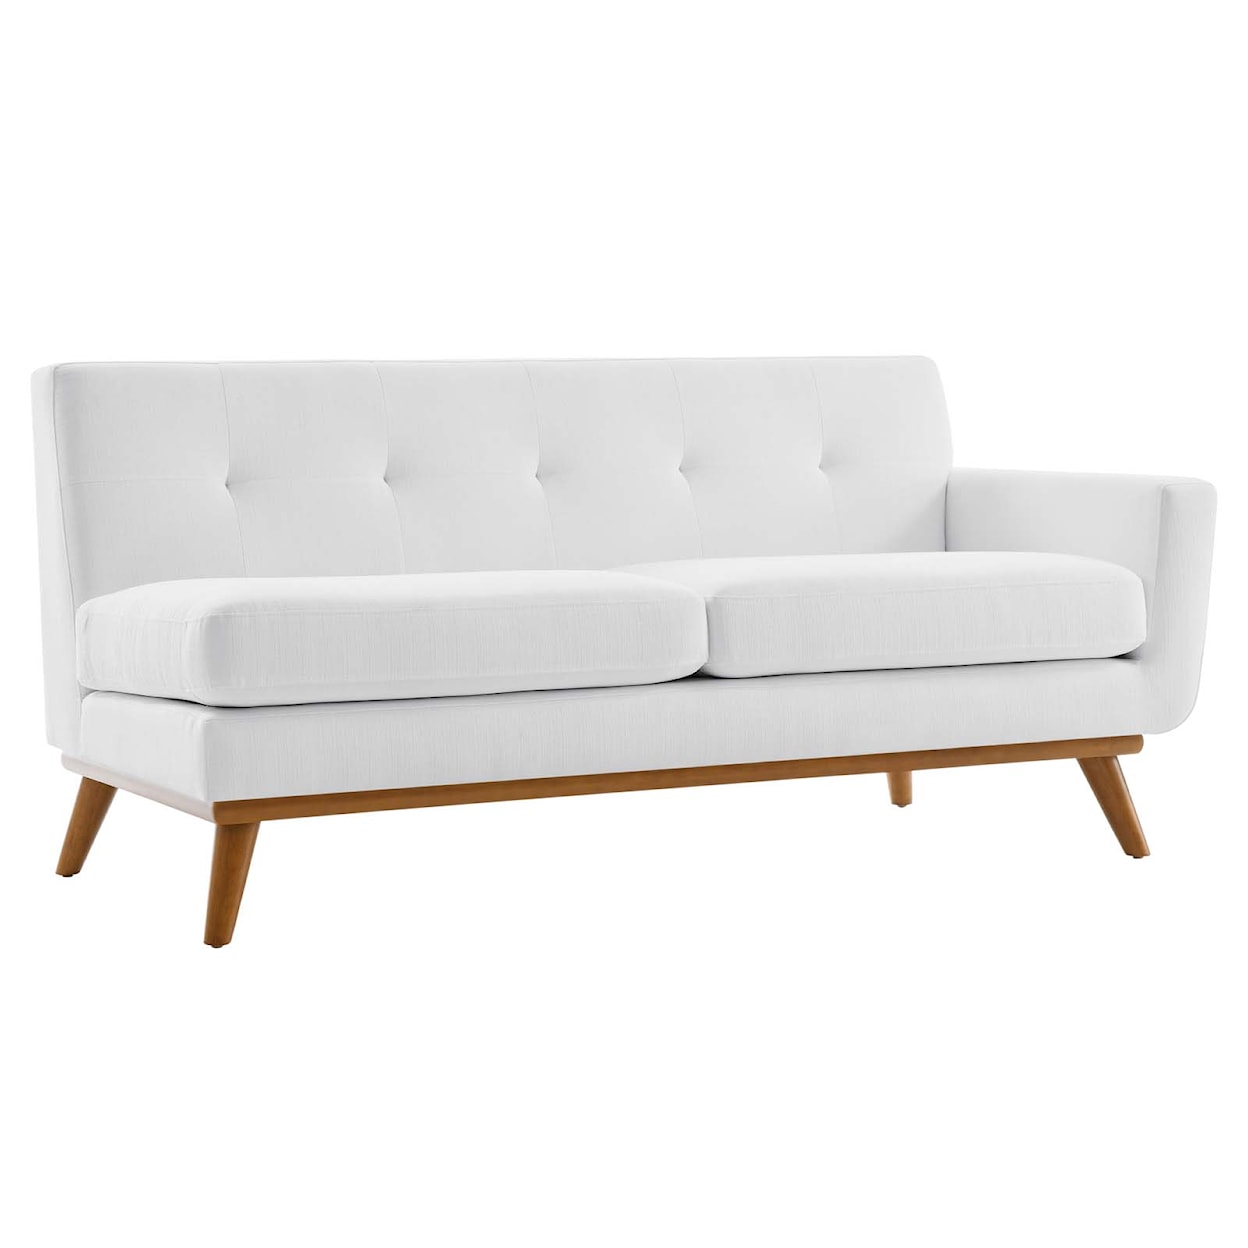 Modway Engage Right-Arm Loveseat